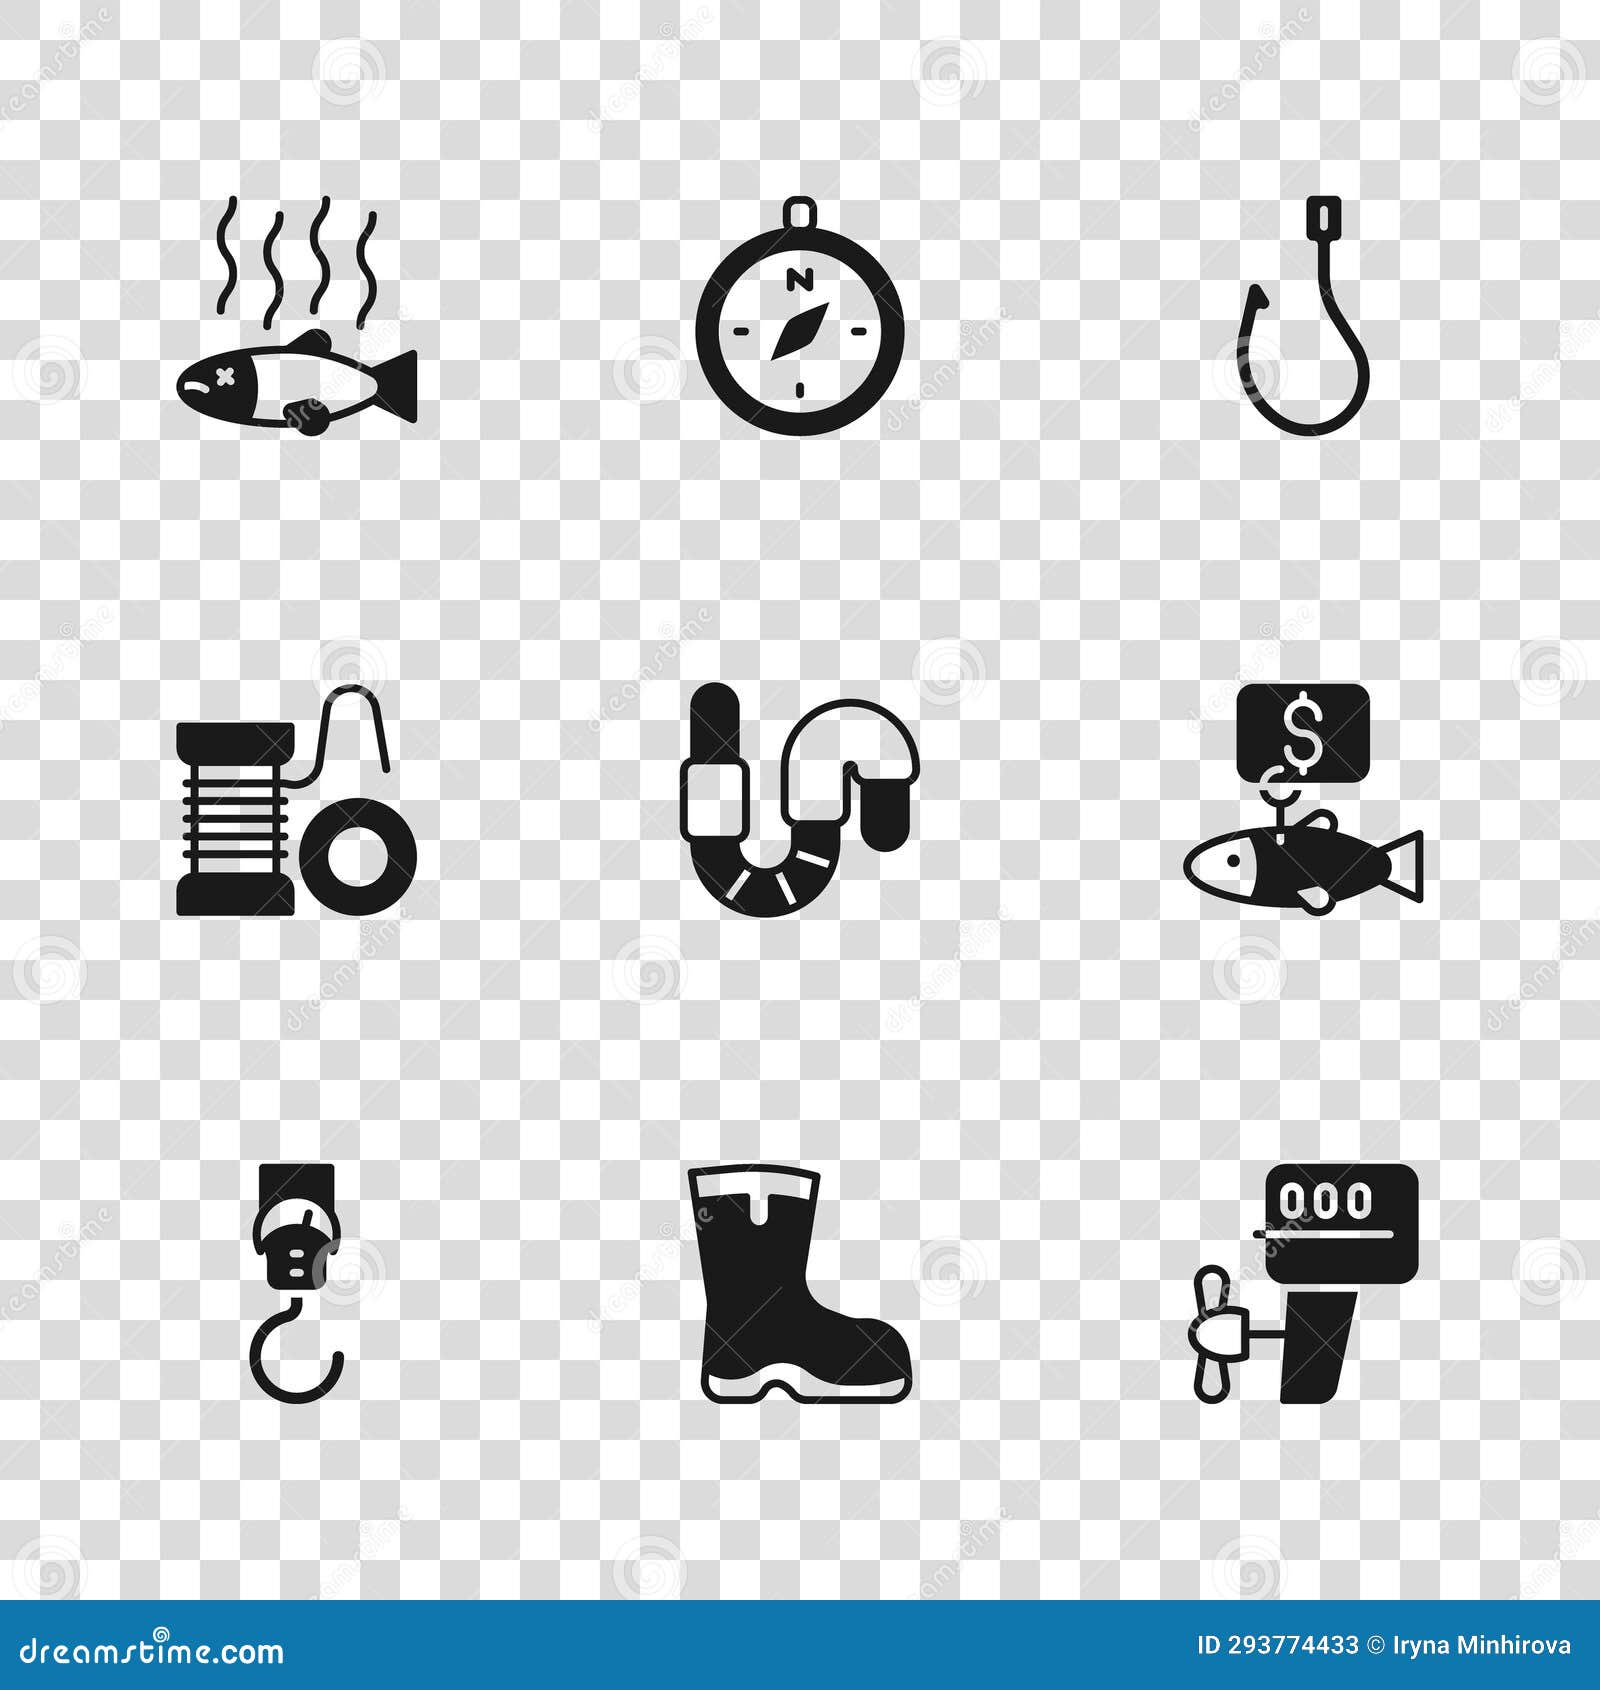 https://thumbs.dreamstime.com/z/set-fishing-boots-price-tag-fish-outboard-boat-motor-worm-hook-dead-compass-spinning-reel-icon-vector-293774433.jpg